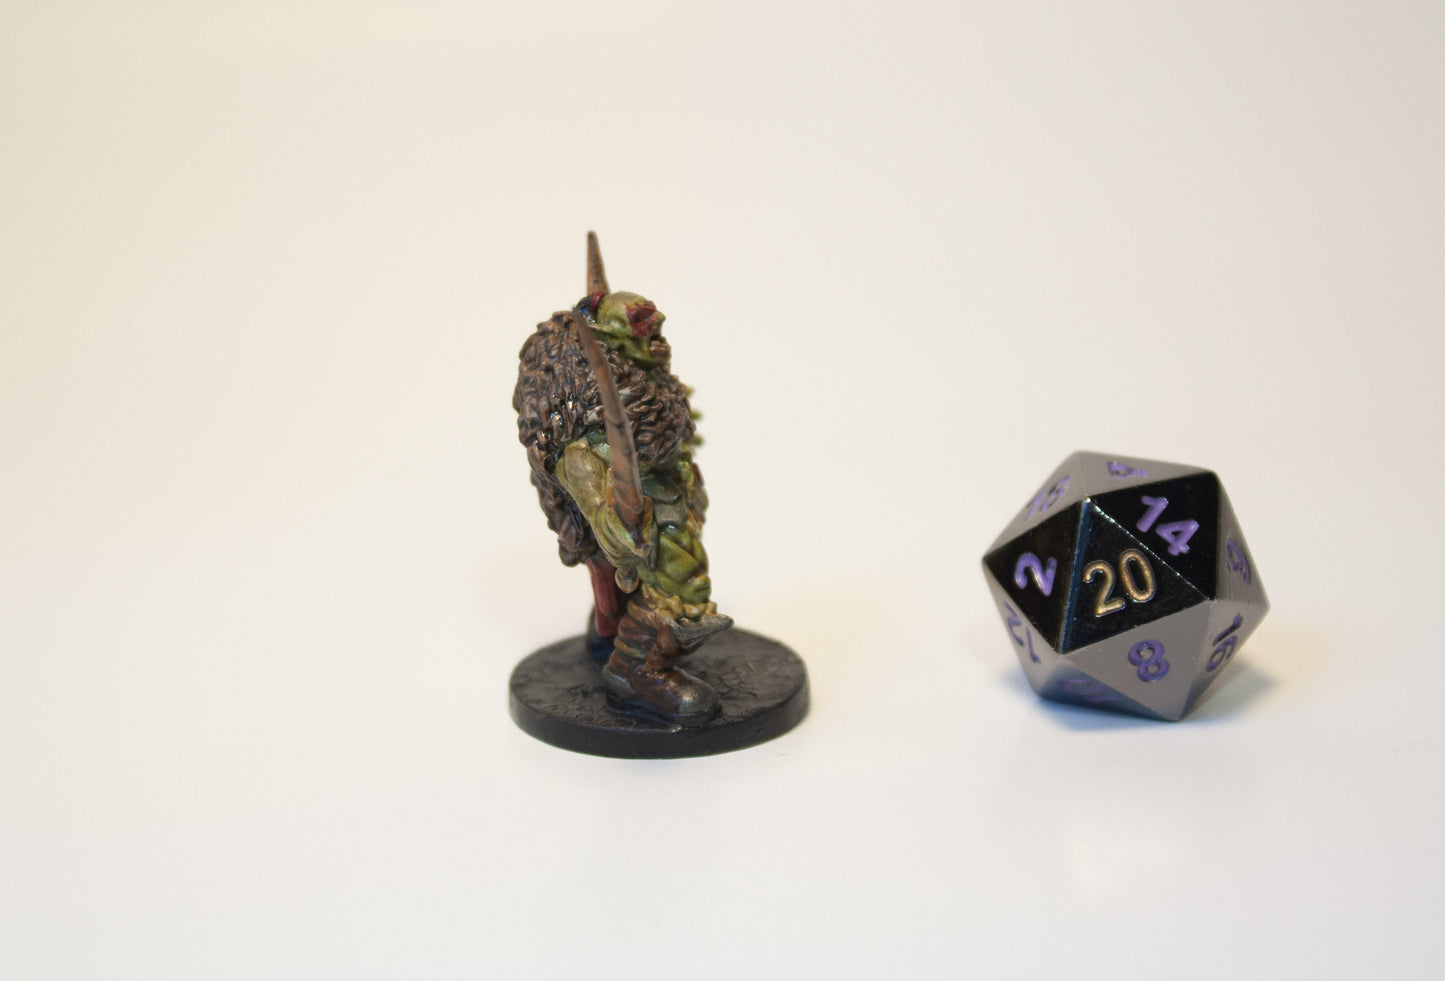 Orc Fighter High Quality Painted D&D Mini - Warrior / Barbarian / Berserker